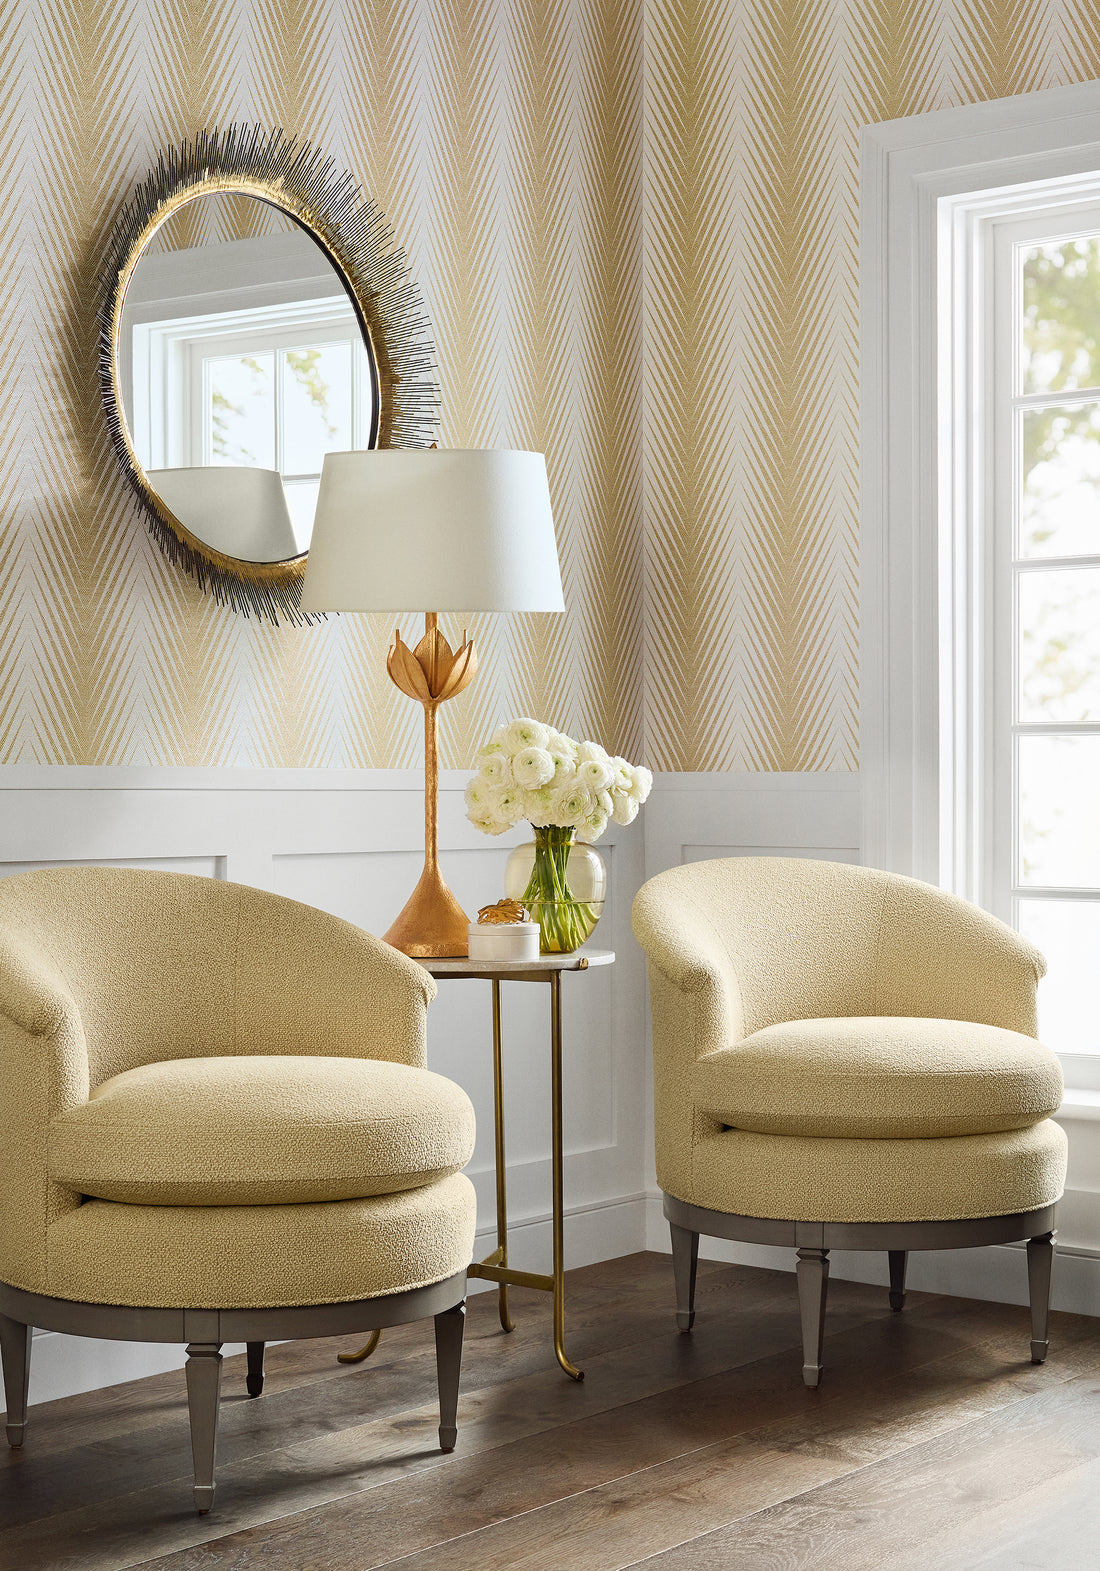 Ashby Chairs in Dolcetto woven fabric in cashmere color - pattern number W8143 - by Thibaut in the Sereno collection